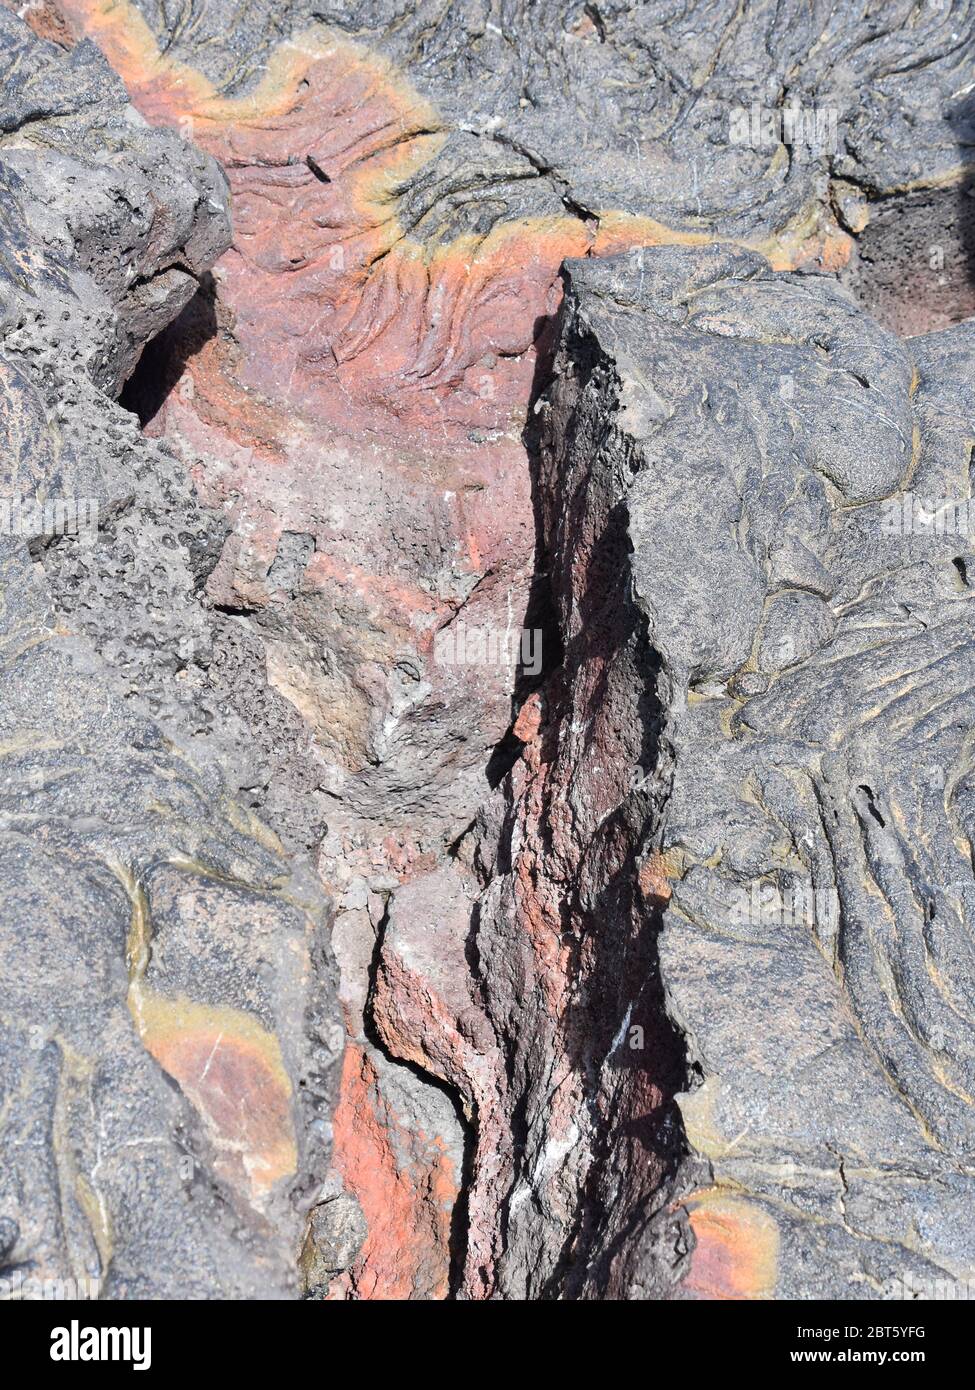 Crack in igneous rock dry lava colorful minerals Stock Photo